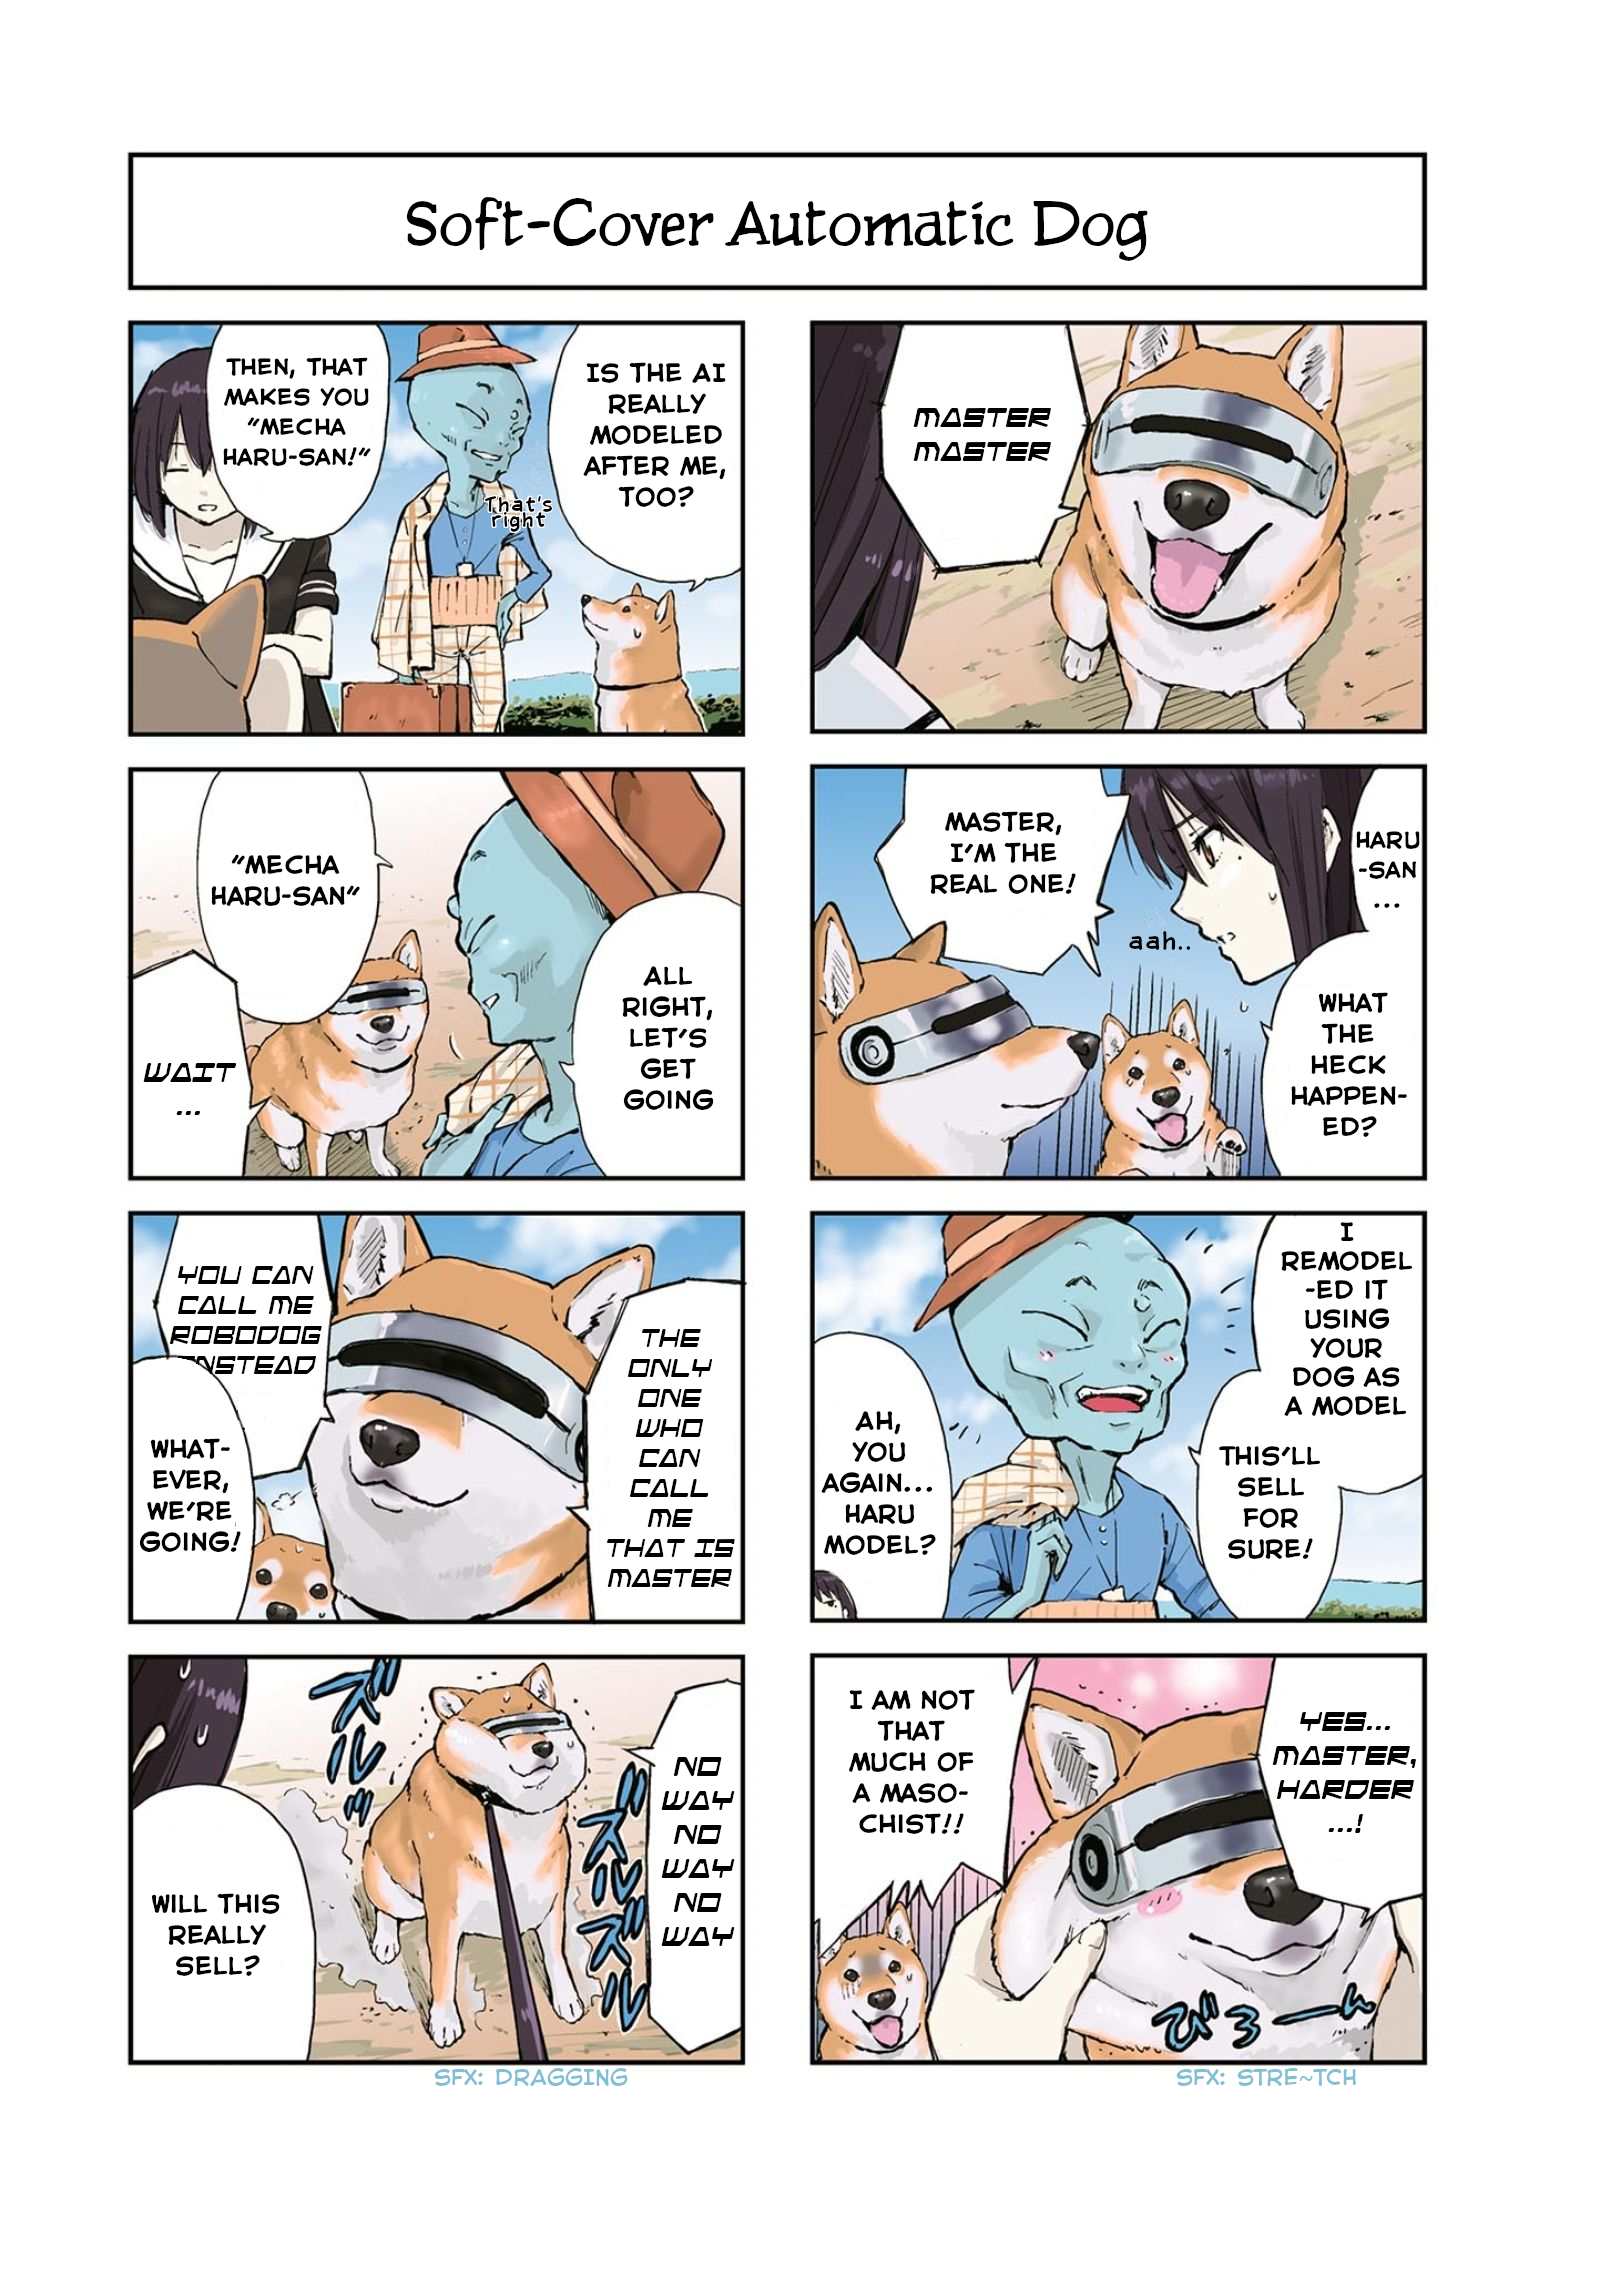 Roaming The Apocalypse With My Shiba Inu - chapter 17 - #6